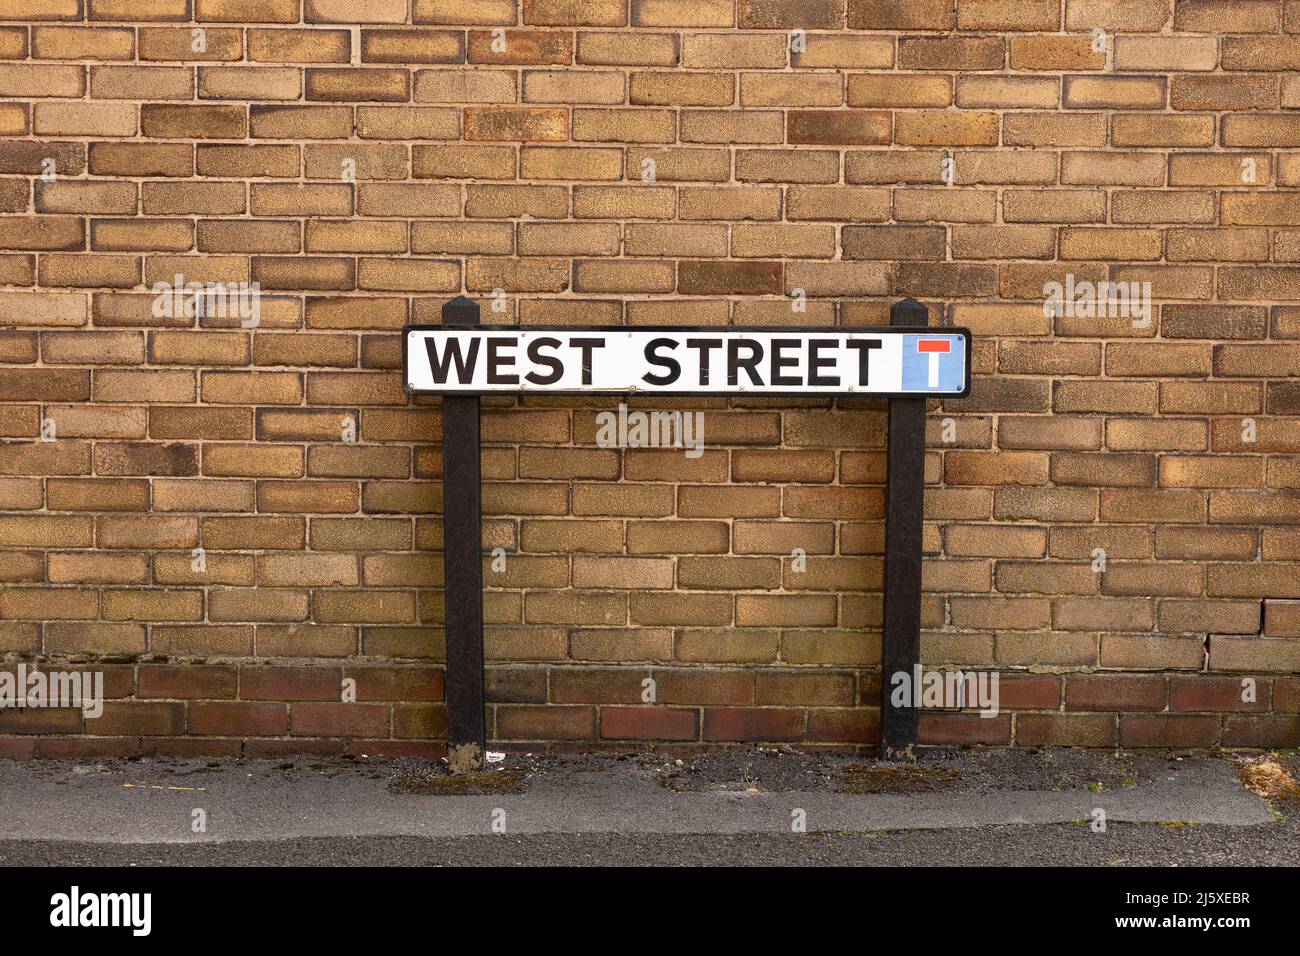 street sign depicting west street and a brick wall background Stock Photo